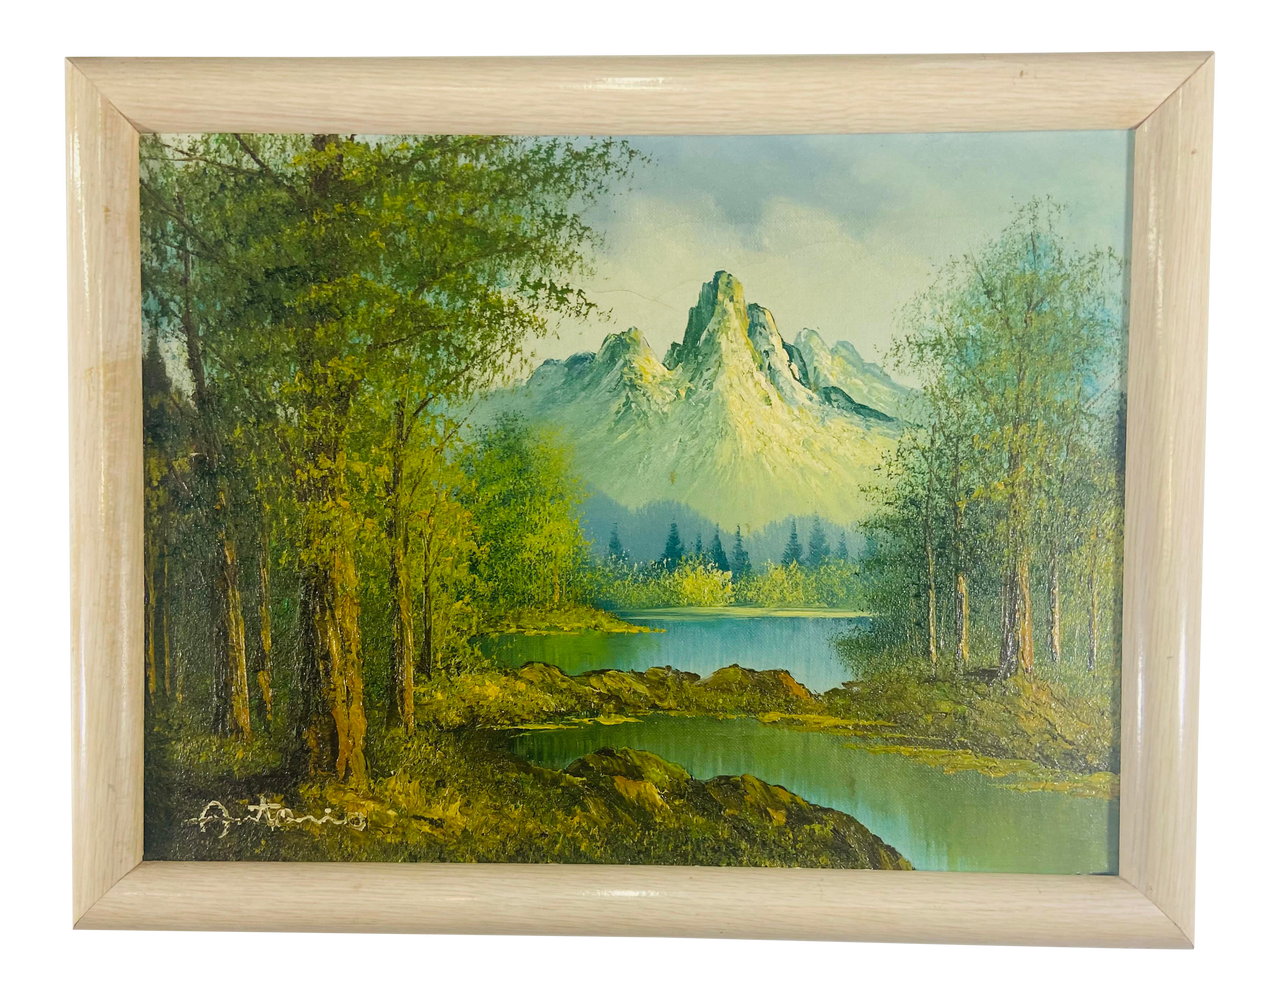 Landscape Oil on Canvas Painting Signed by Artist